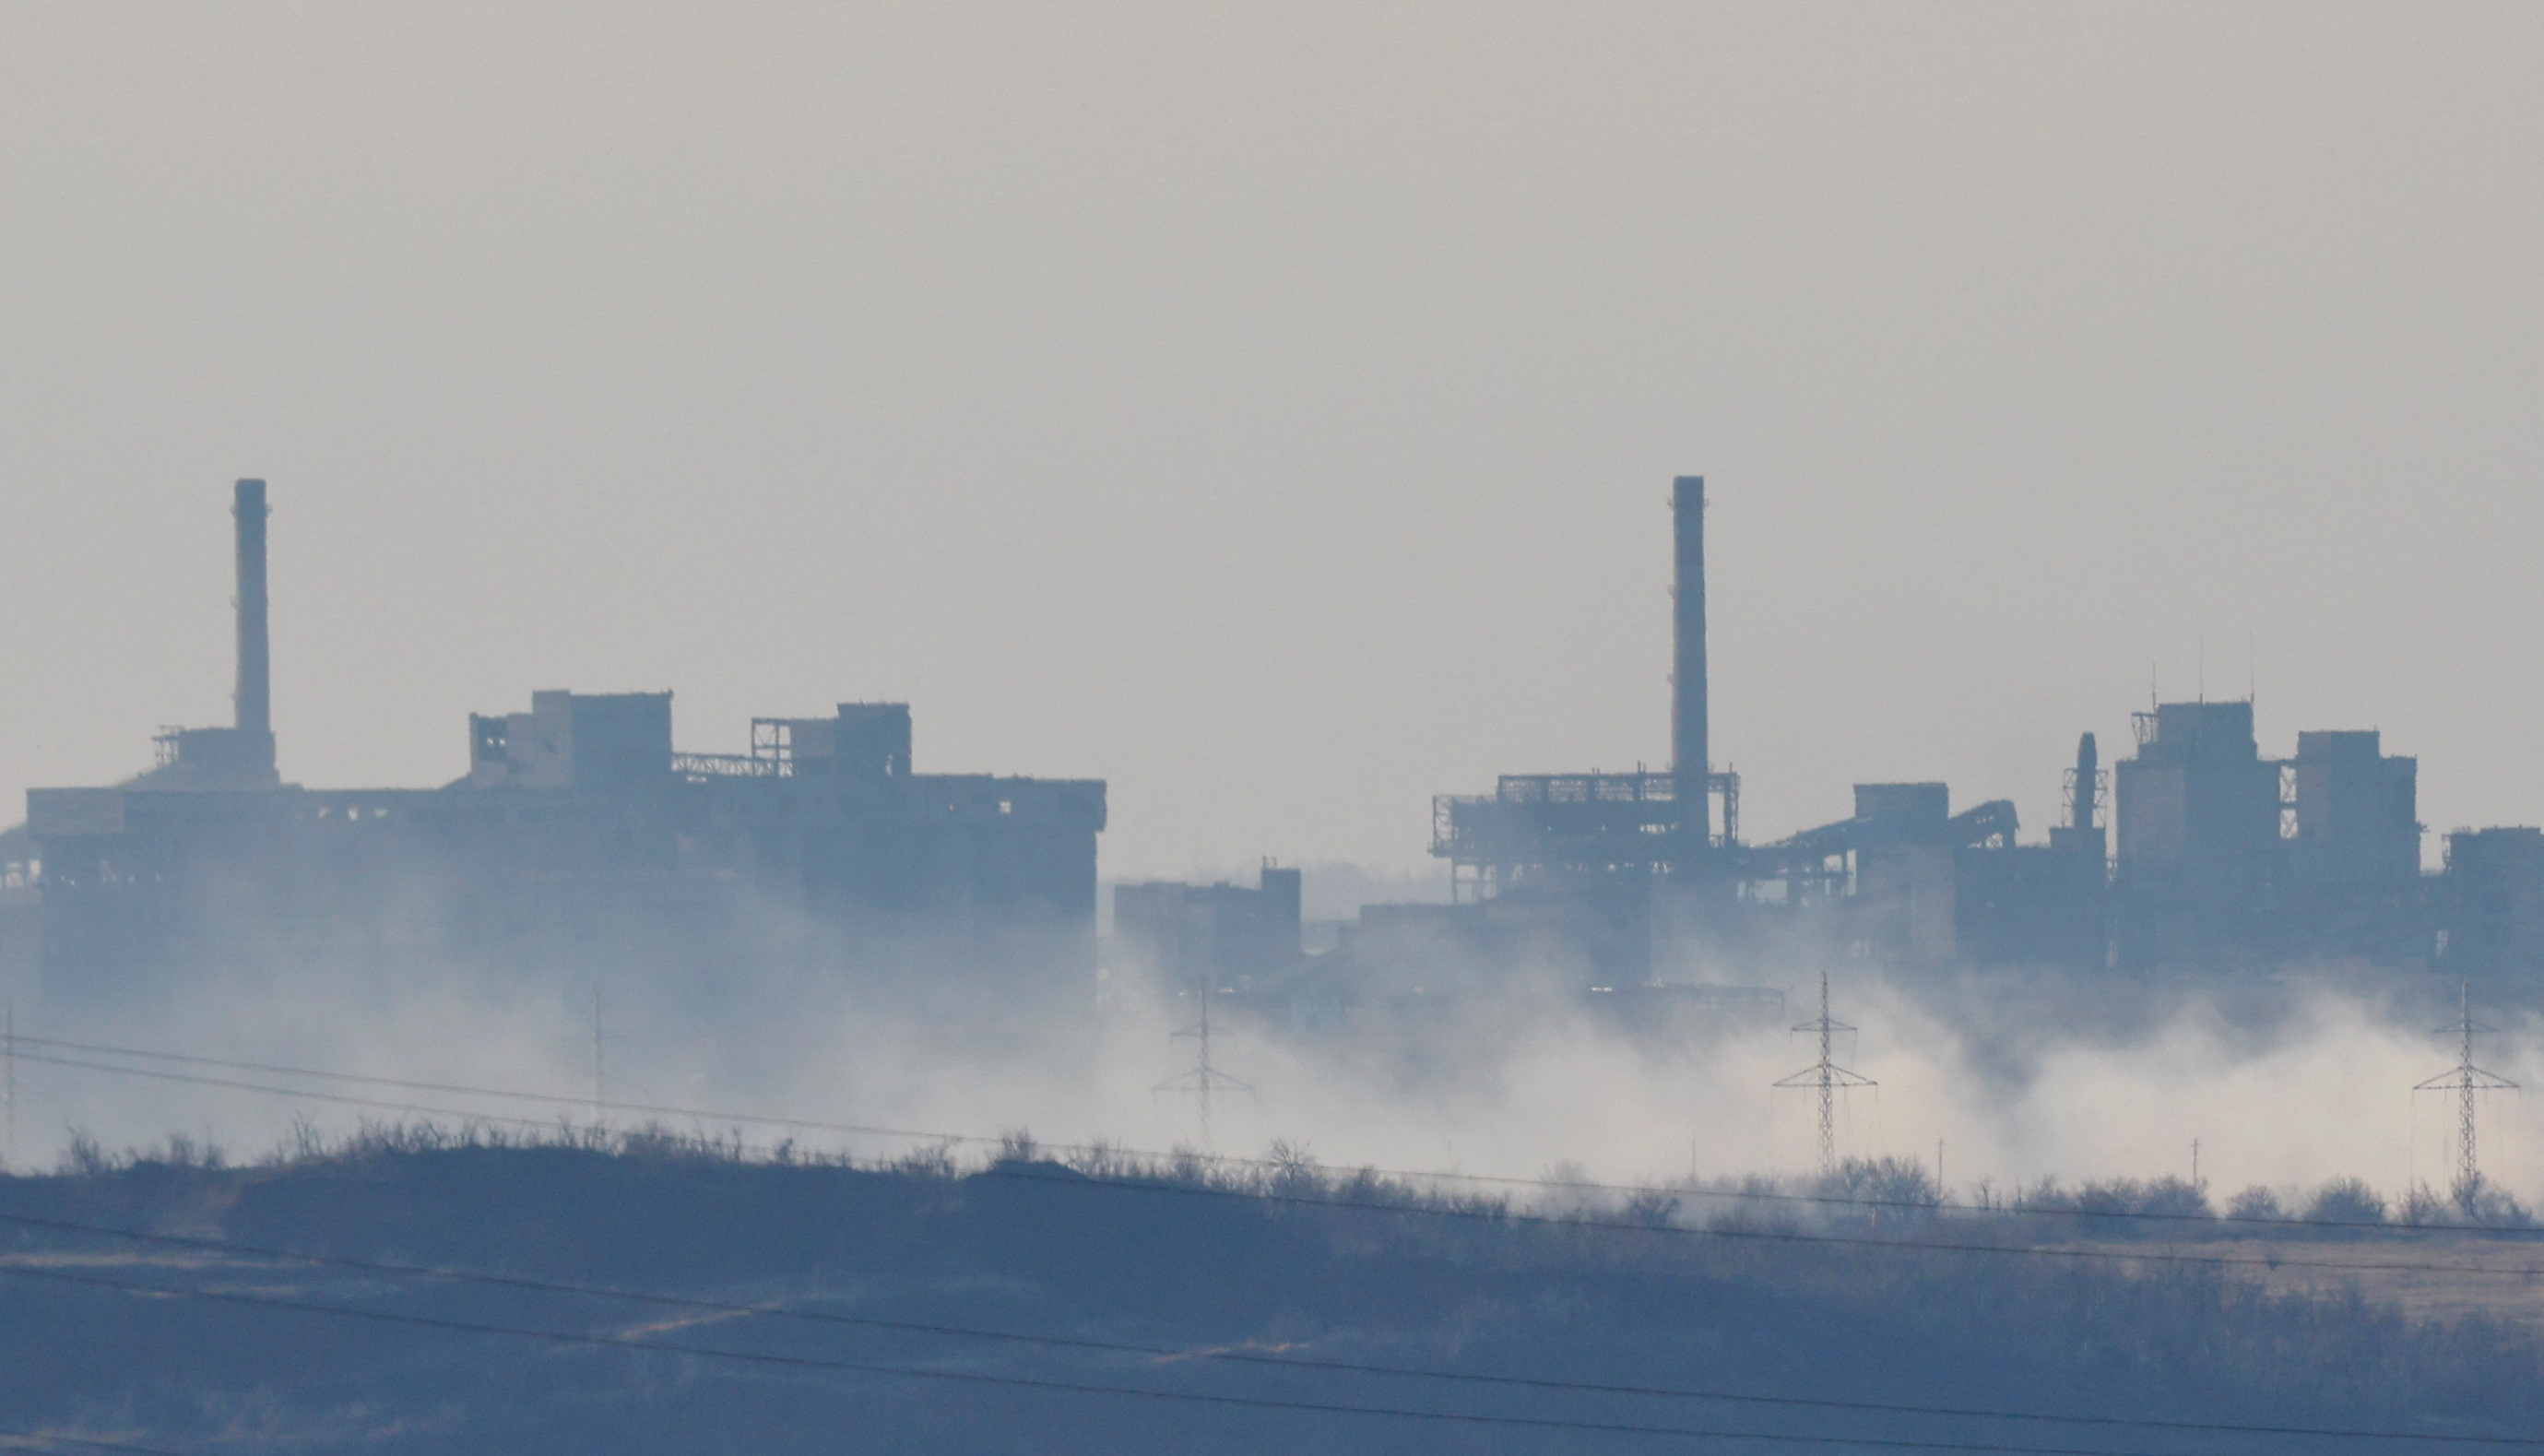 A view shows Avdiivka Coke and Chemical Plant